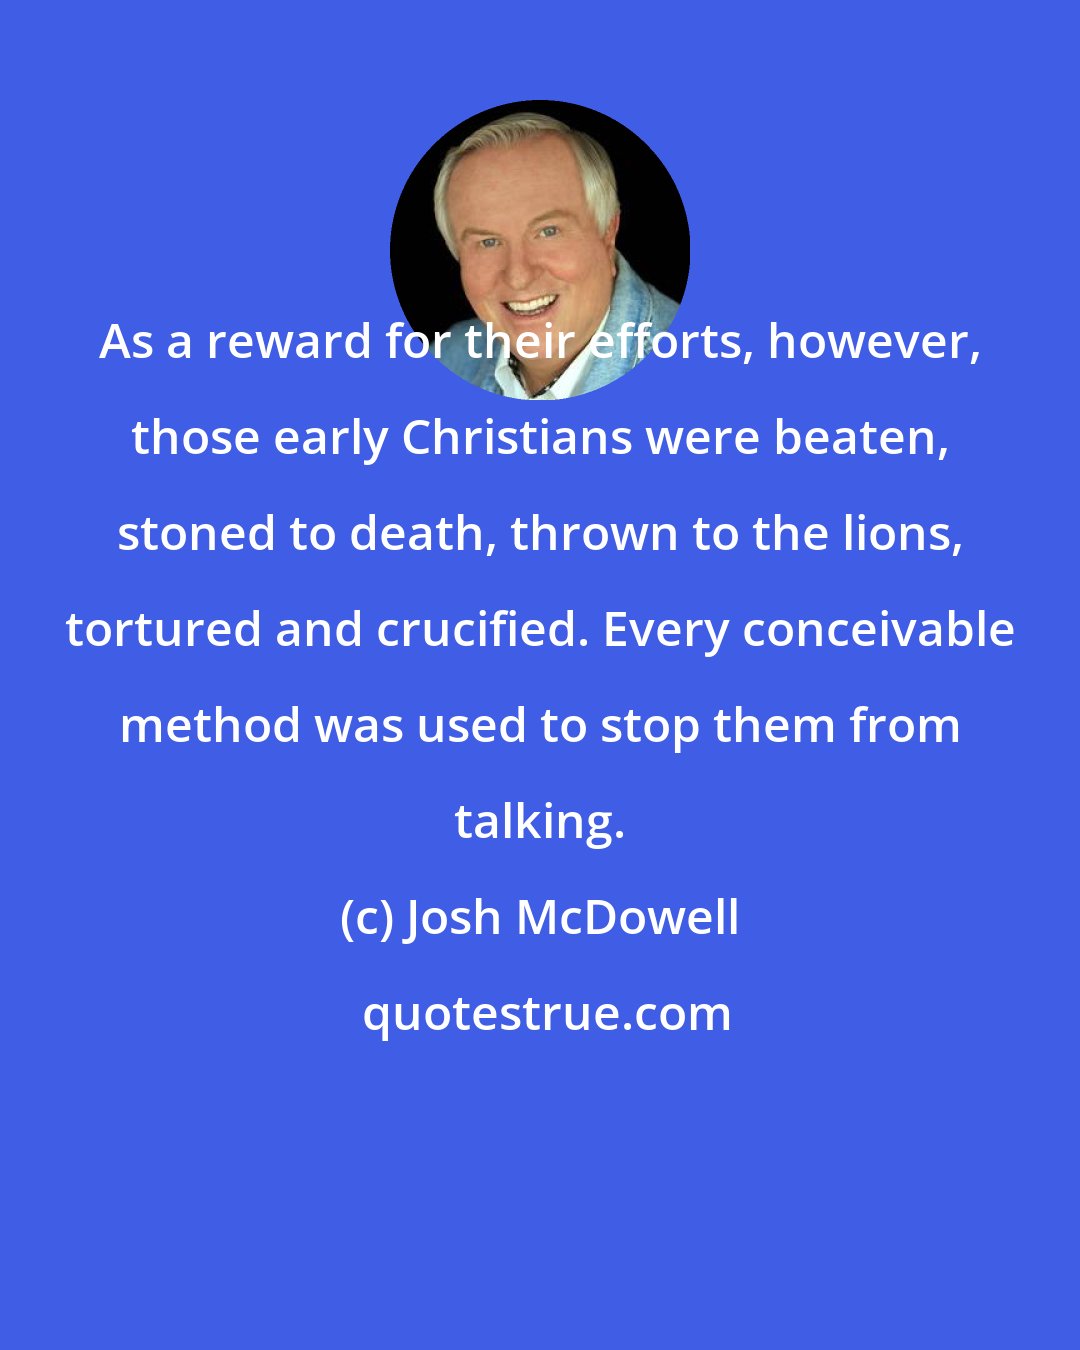 Josh McDowell: As a reward for their efforts, however, those early Christians were beaten, stoned to death, thrown to the lions, tortured and crucified. Every conceivable method was used to stop them from talking.